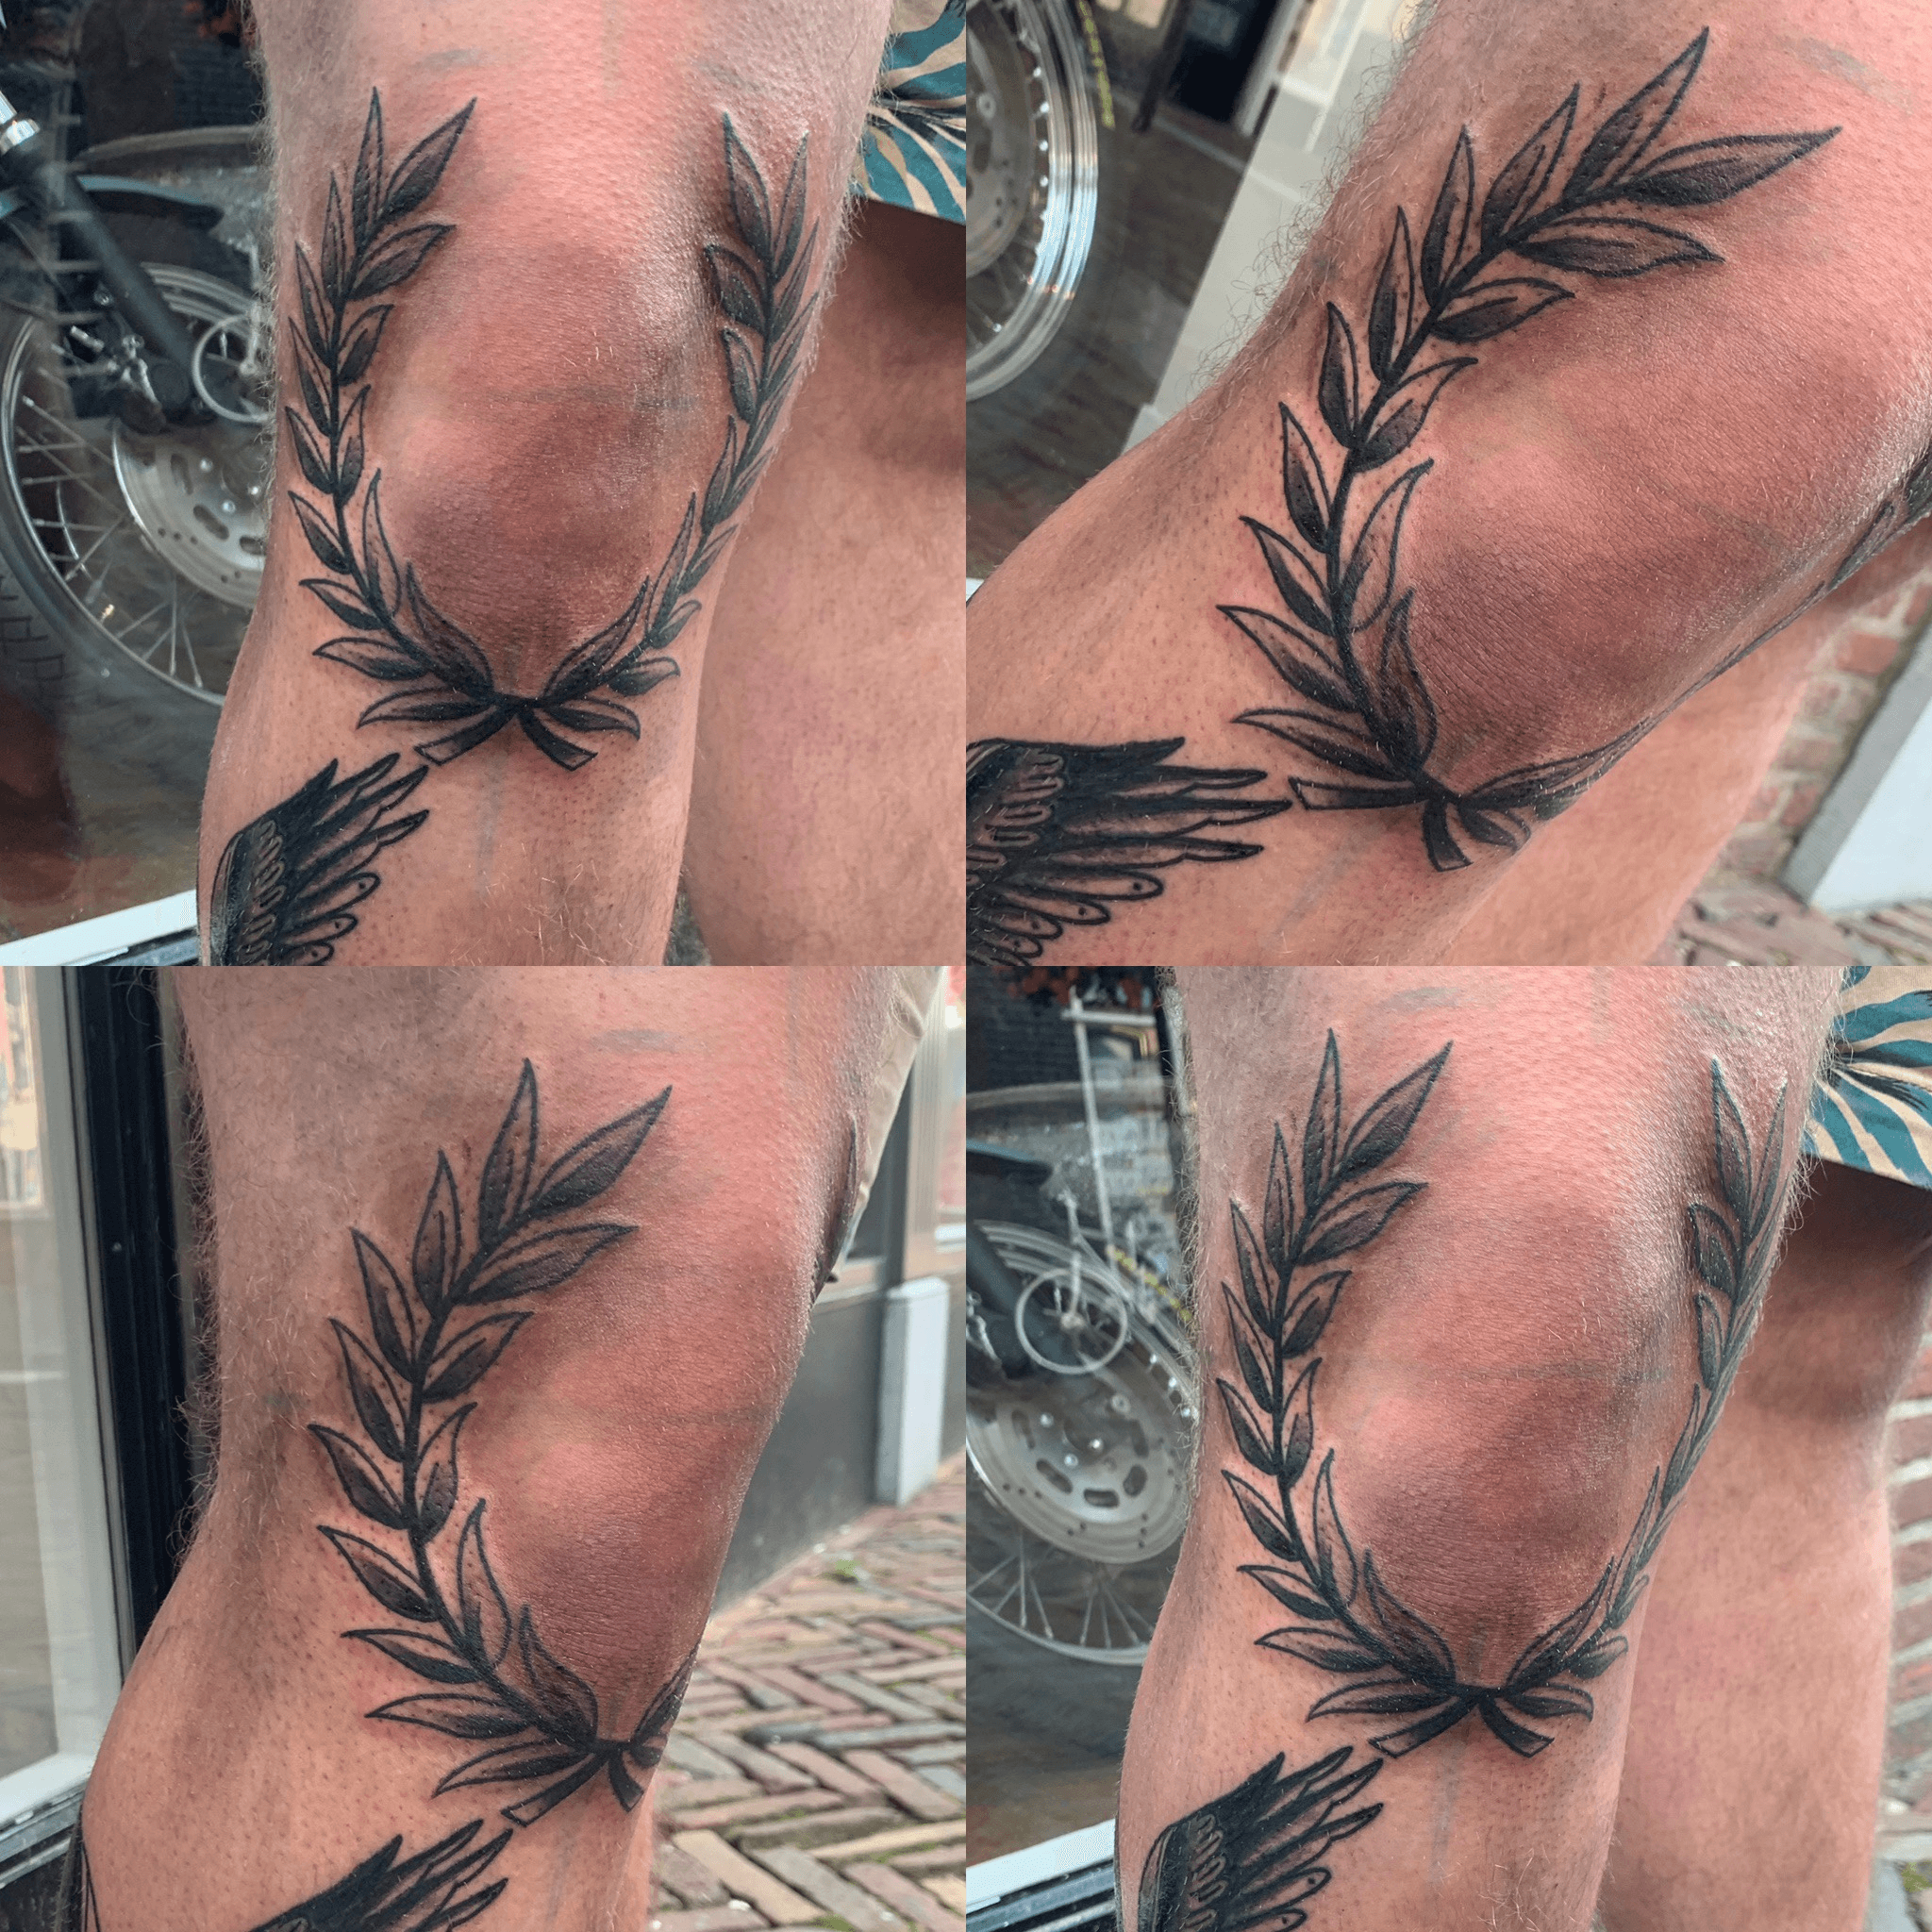 200 Olive Branch Tattoo Ideas To Bring Peace In The World